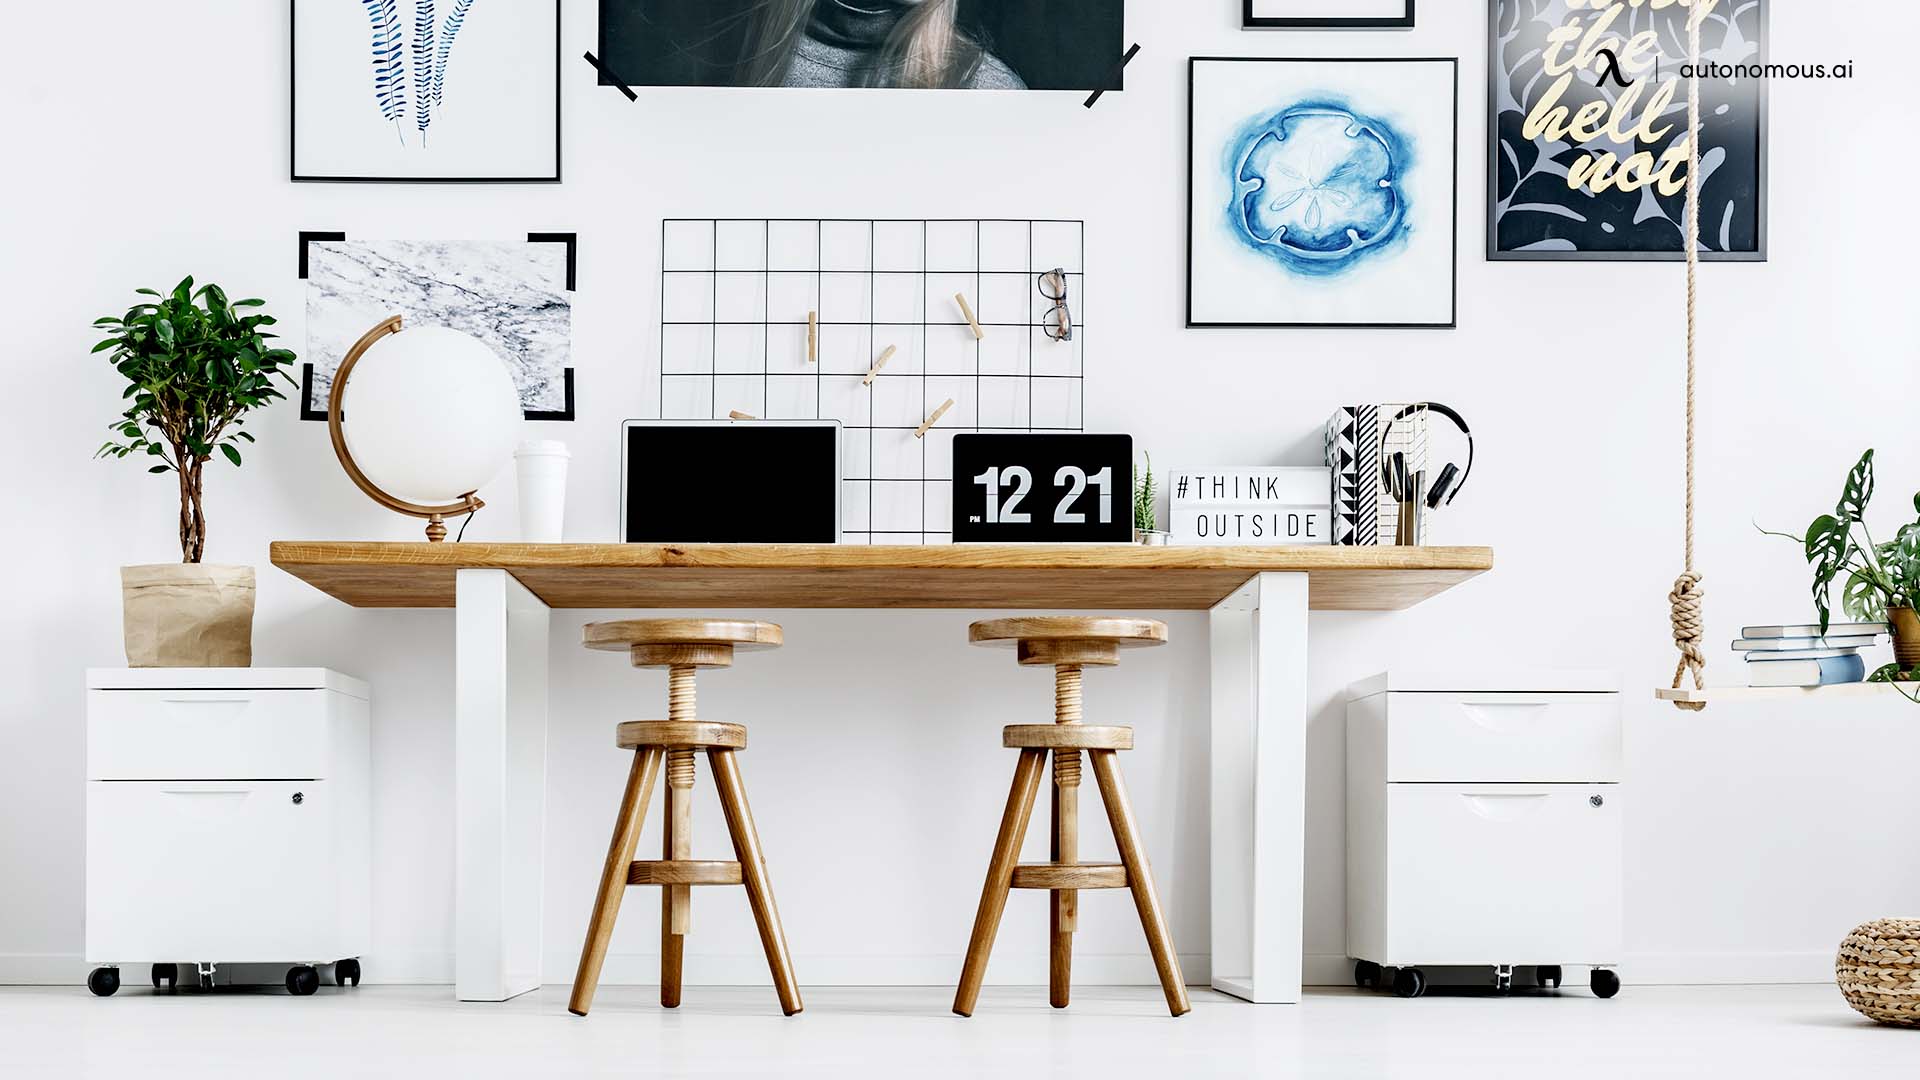 10+ Home Office Wall Decor Ideas for a Creative Workspace